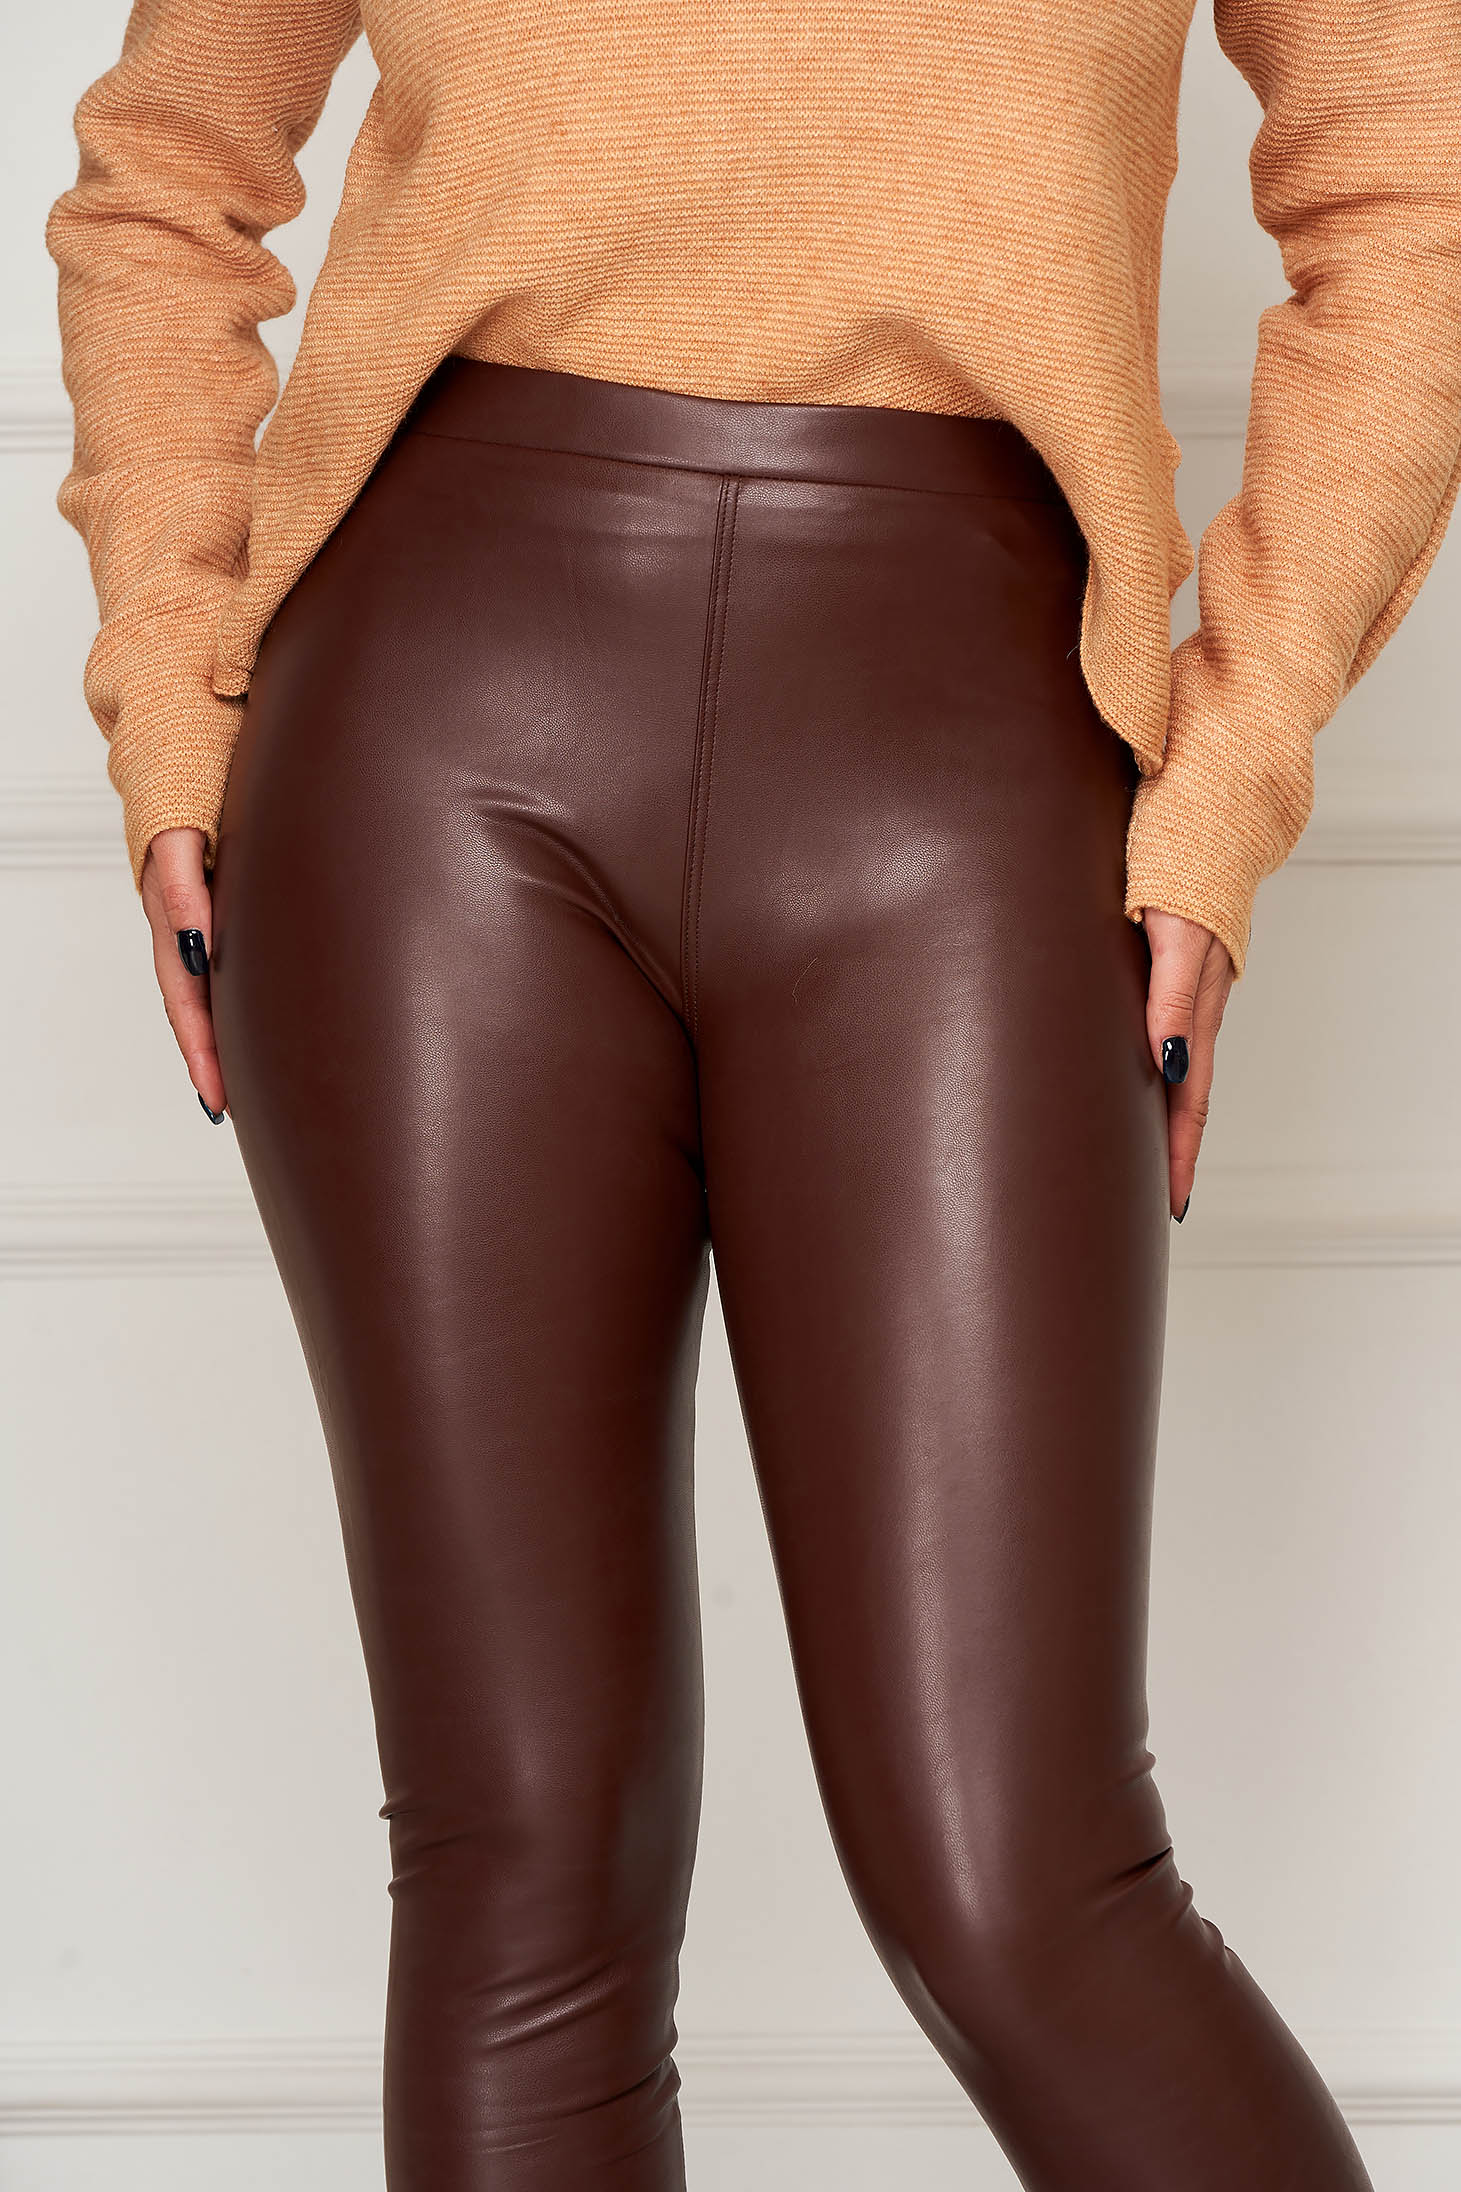 From ecological leather high waisted elastic waist burgundy tights 3 - StarShinerS.com